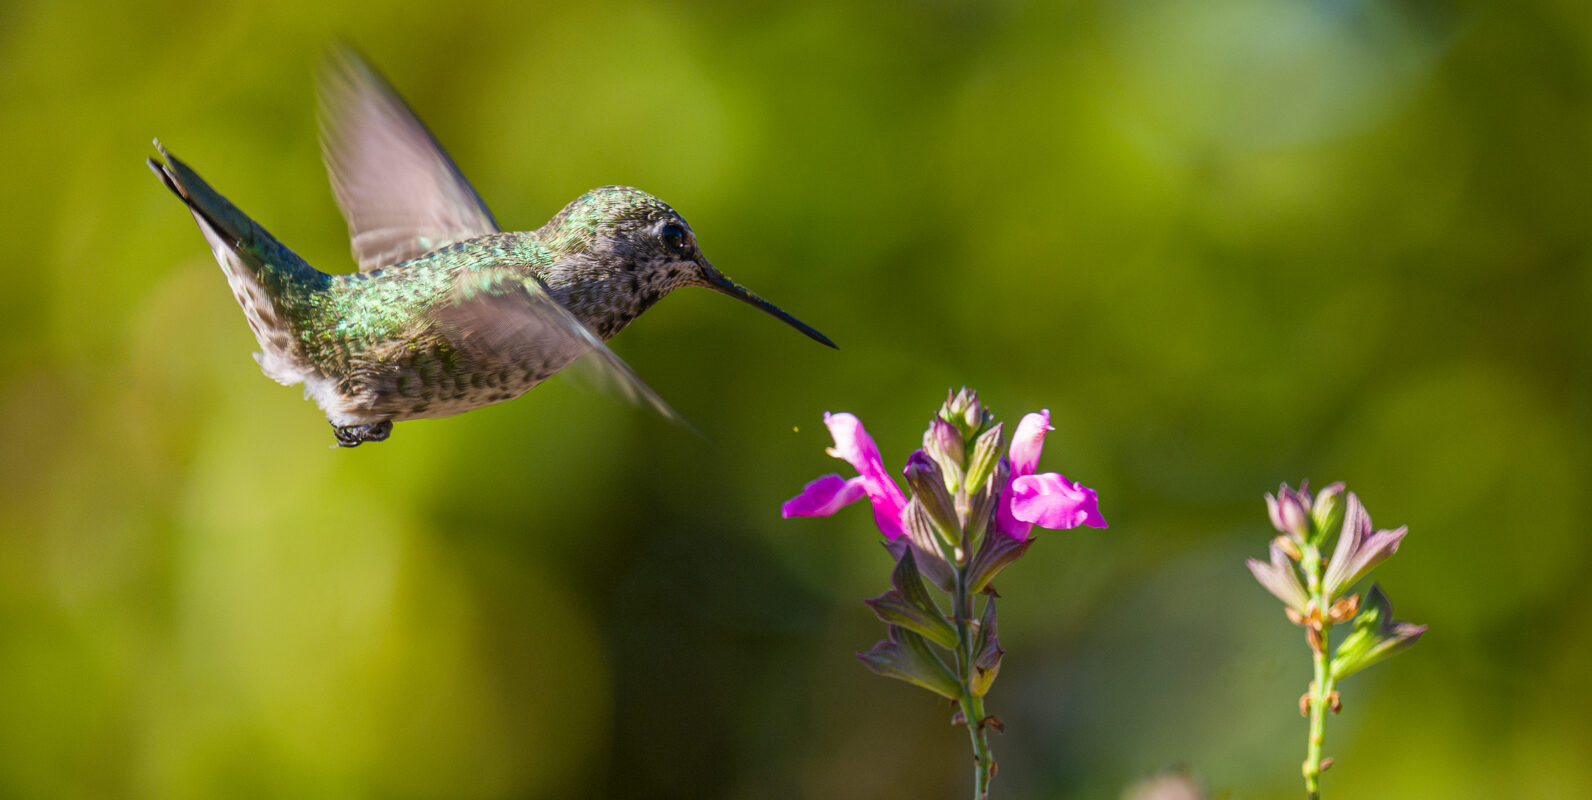 A hummingbird hovers by a flower.